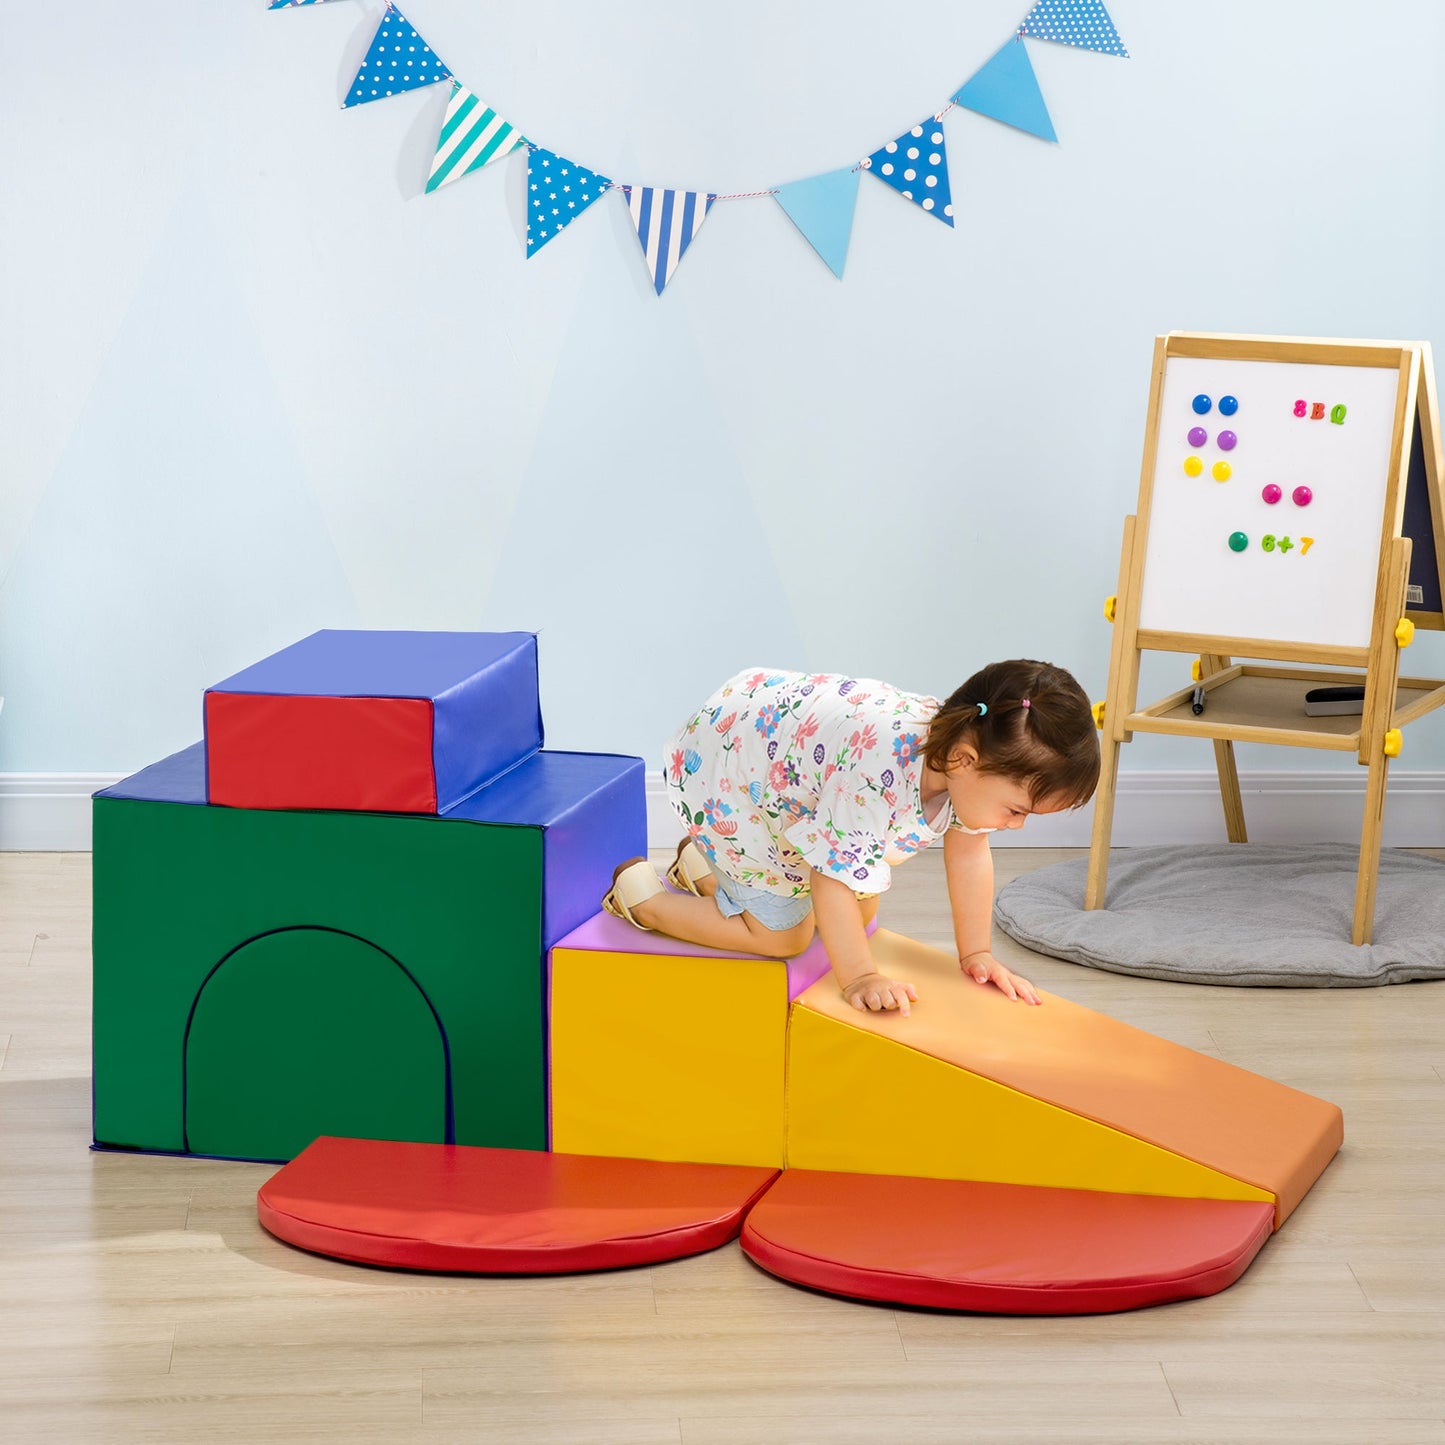 7-piece Soft Play, Foam Play Set, Toddler Stairs and Ramp, Colorful Kids' Educational Software, Activity Toys for Baby Preschooler - Multicolored at Gallery Canada